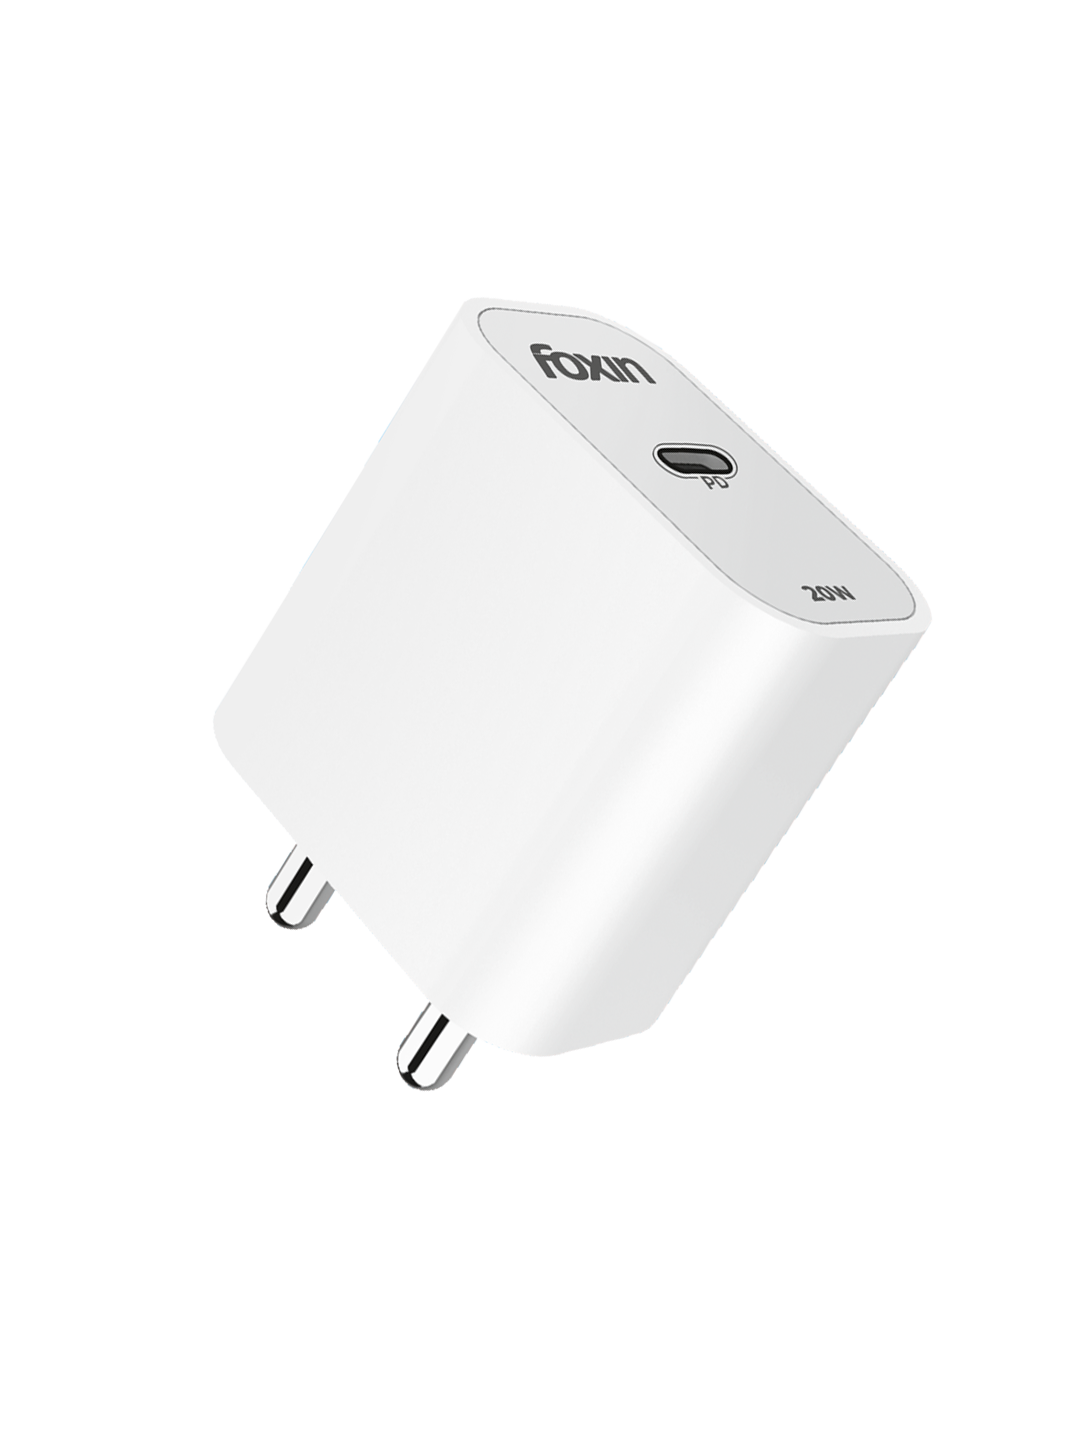 Foxin PD20 Fast Charging Smart USB Power Delivery Adapter